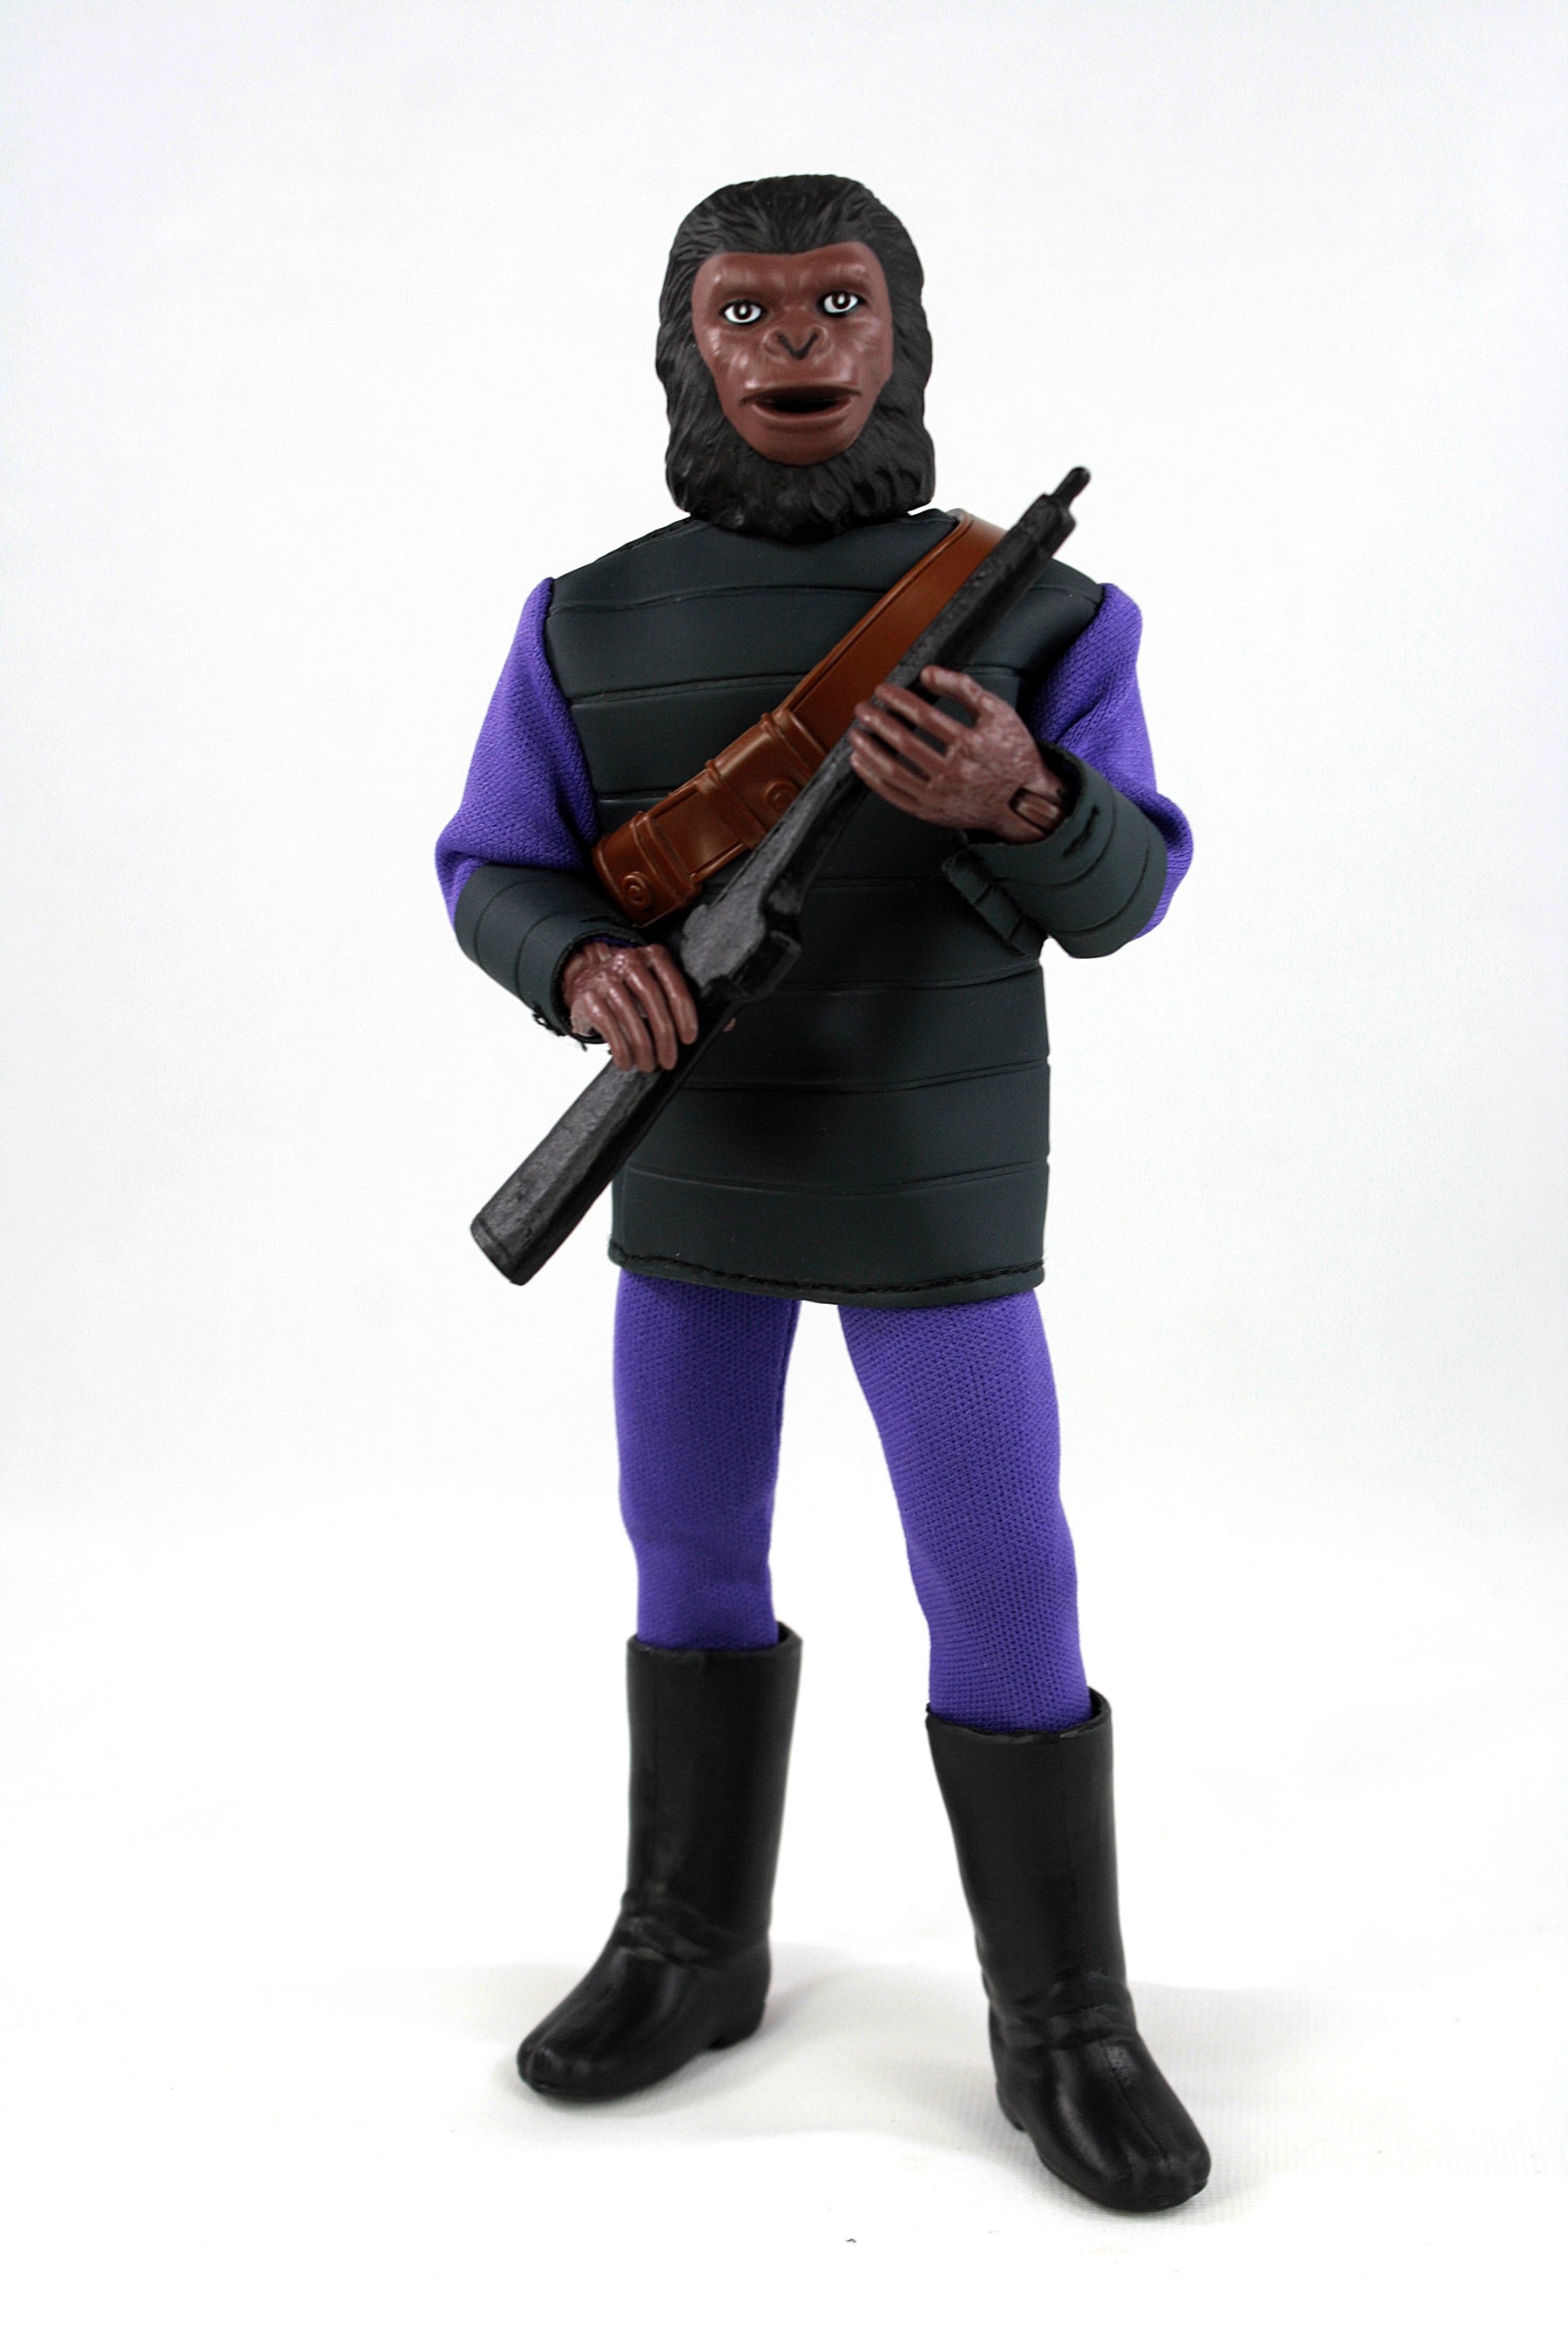 Mego Planet of The Apes Wave 14 - Soldier Ape with Black Bandolier 8" Action Figure - Zlc Collectibles